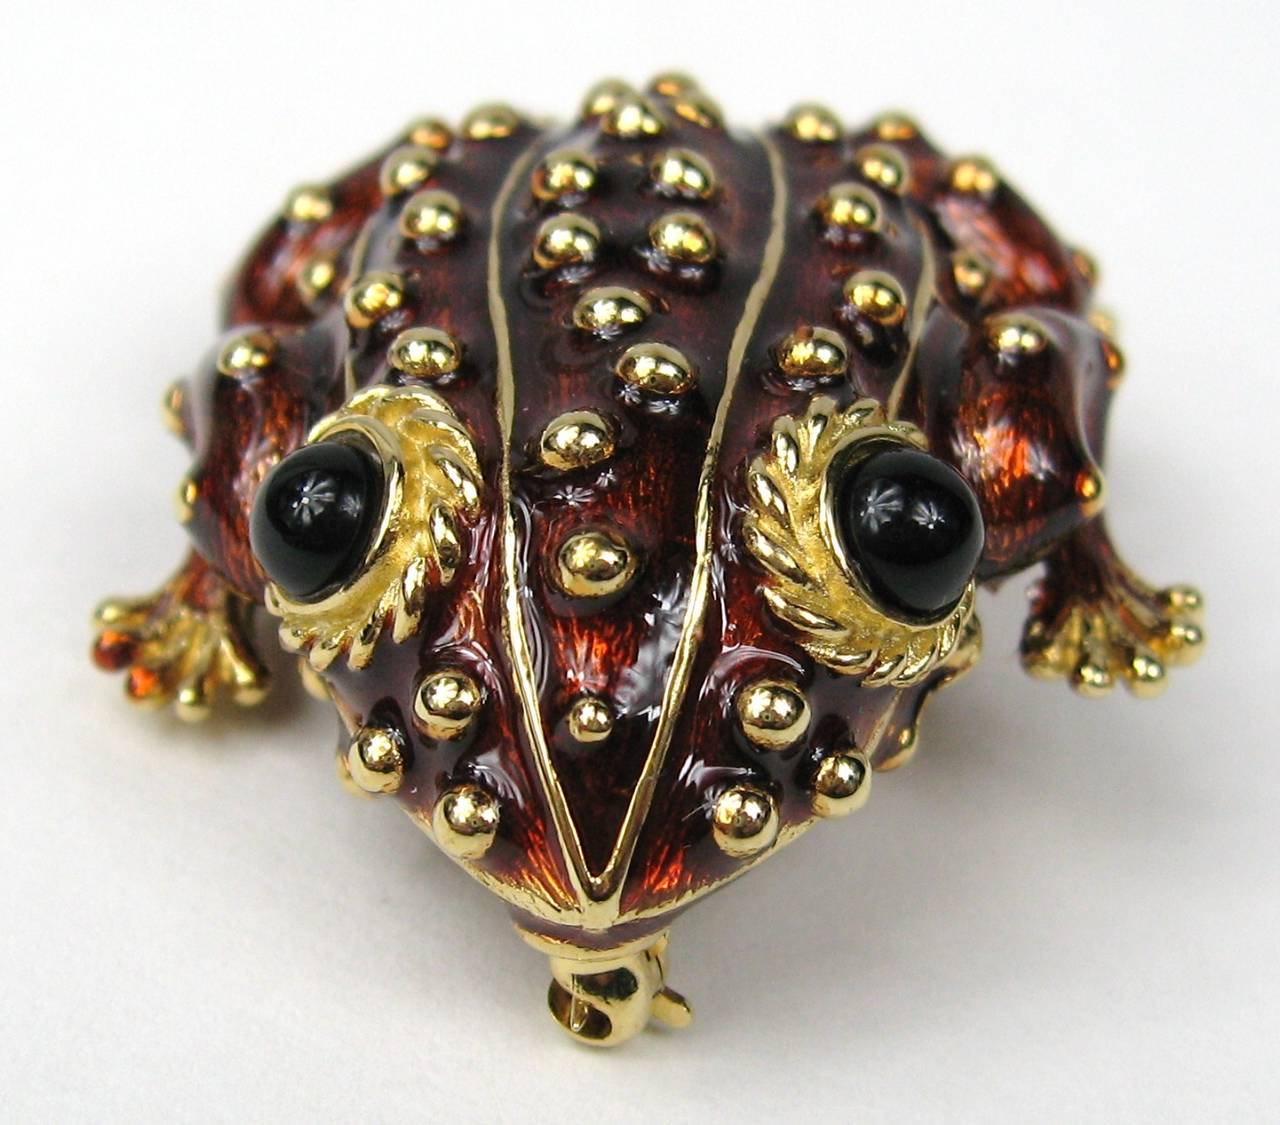 Stunning Brown Ciner Enamel Brooch with Black crystal eyes. Measures 1.69 in x 1.40 in.  Great Holiday Gift or just because! This is out of a massive collection of Hopi, Zuni, Navajo, Southwestern, sterling silver, (costume jewelry that was not